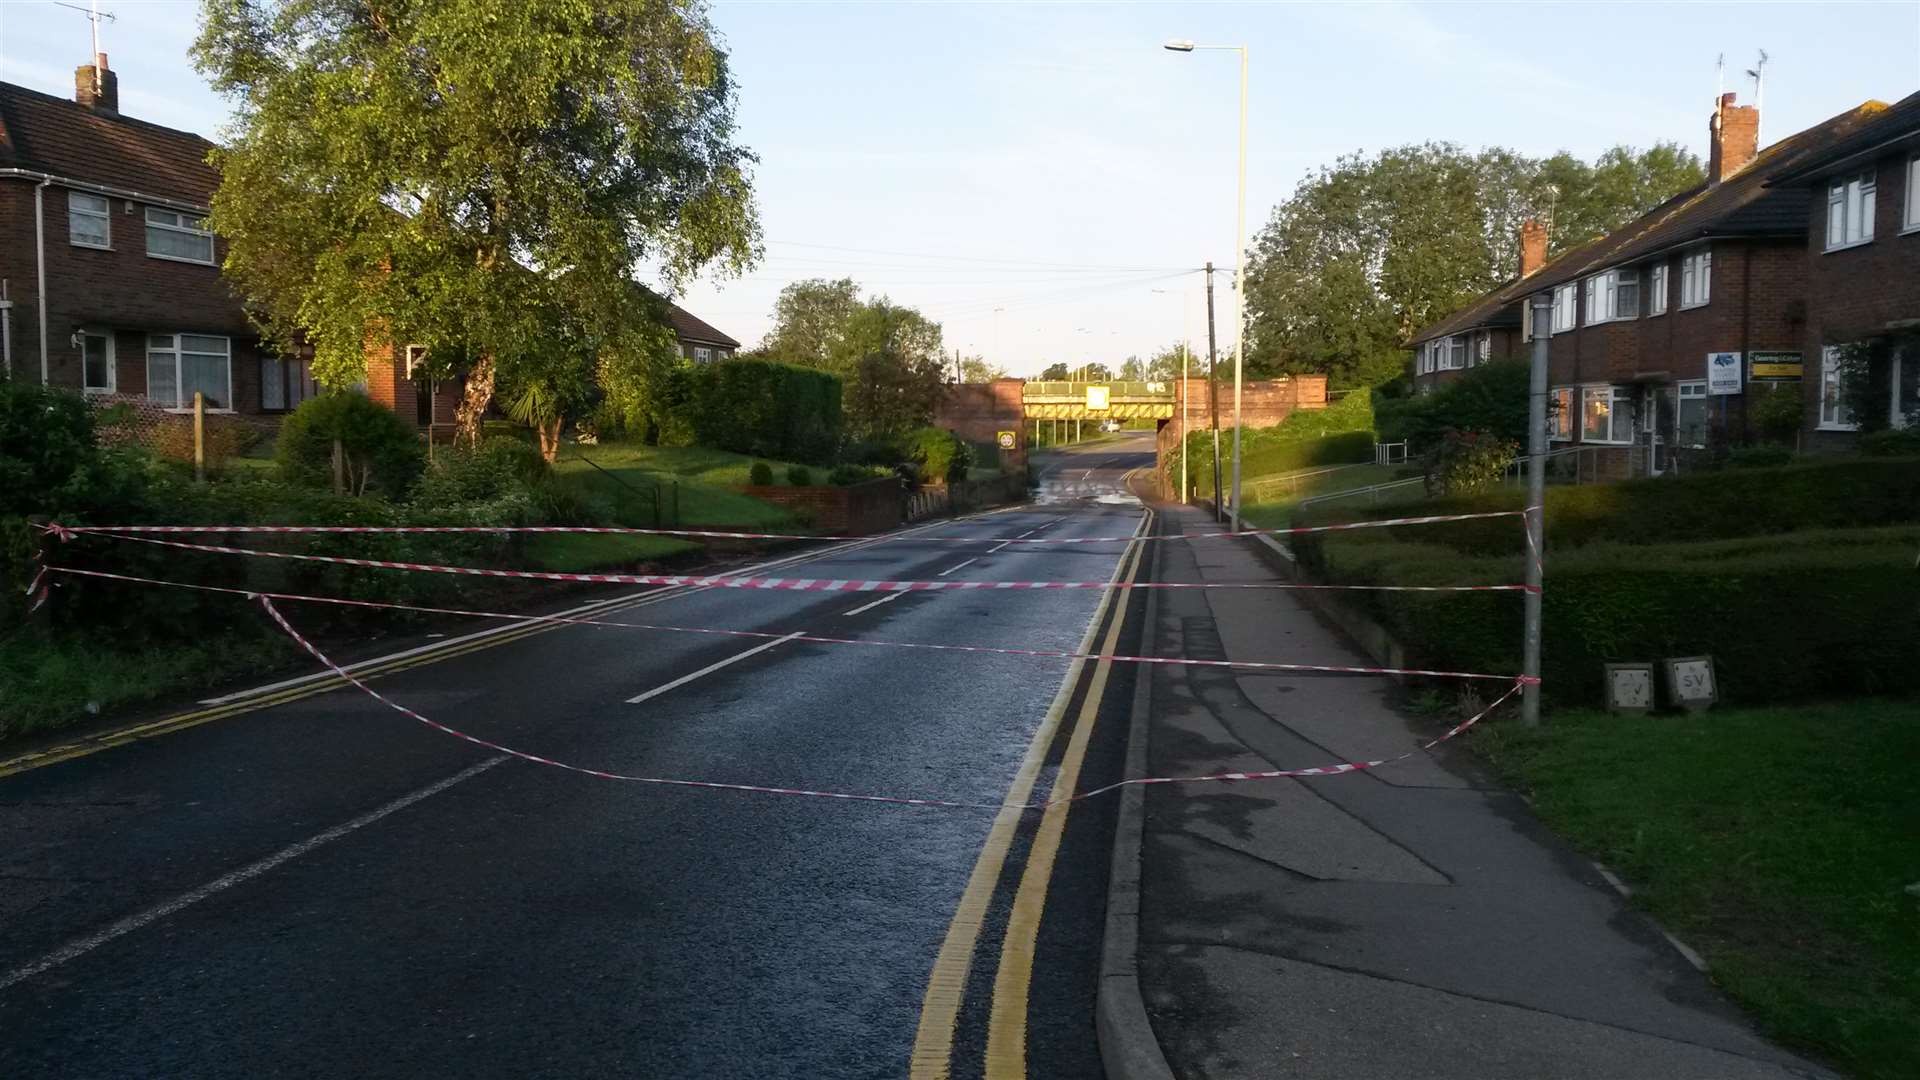 Chart Road in Ashford is closed to traffic